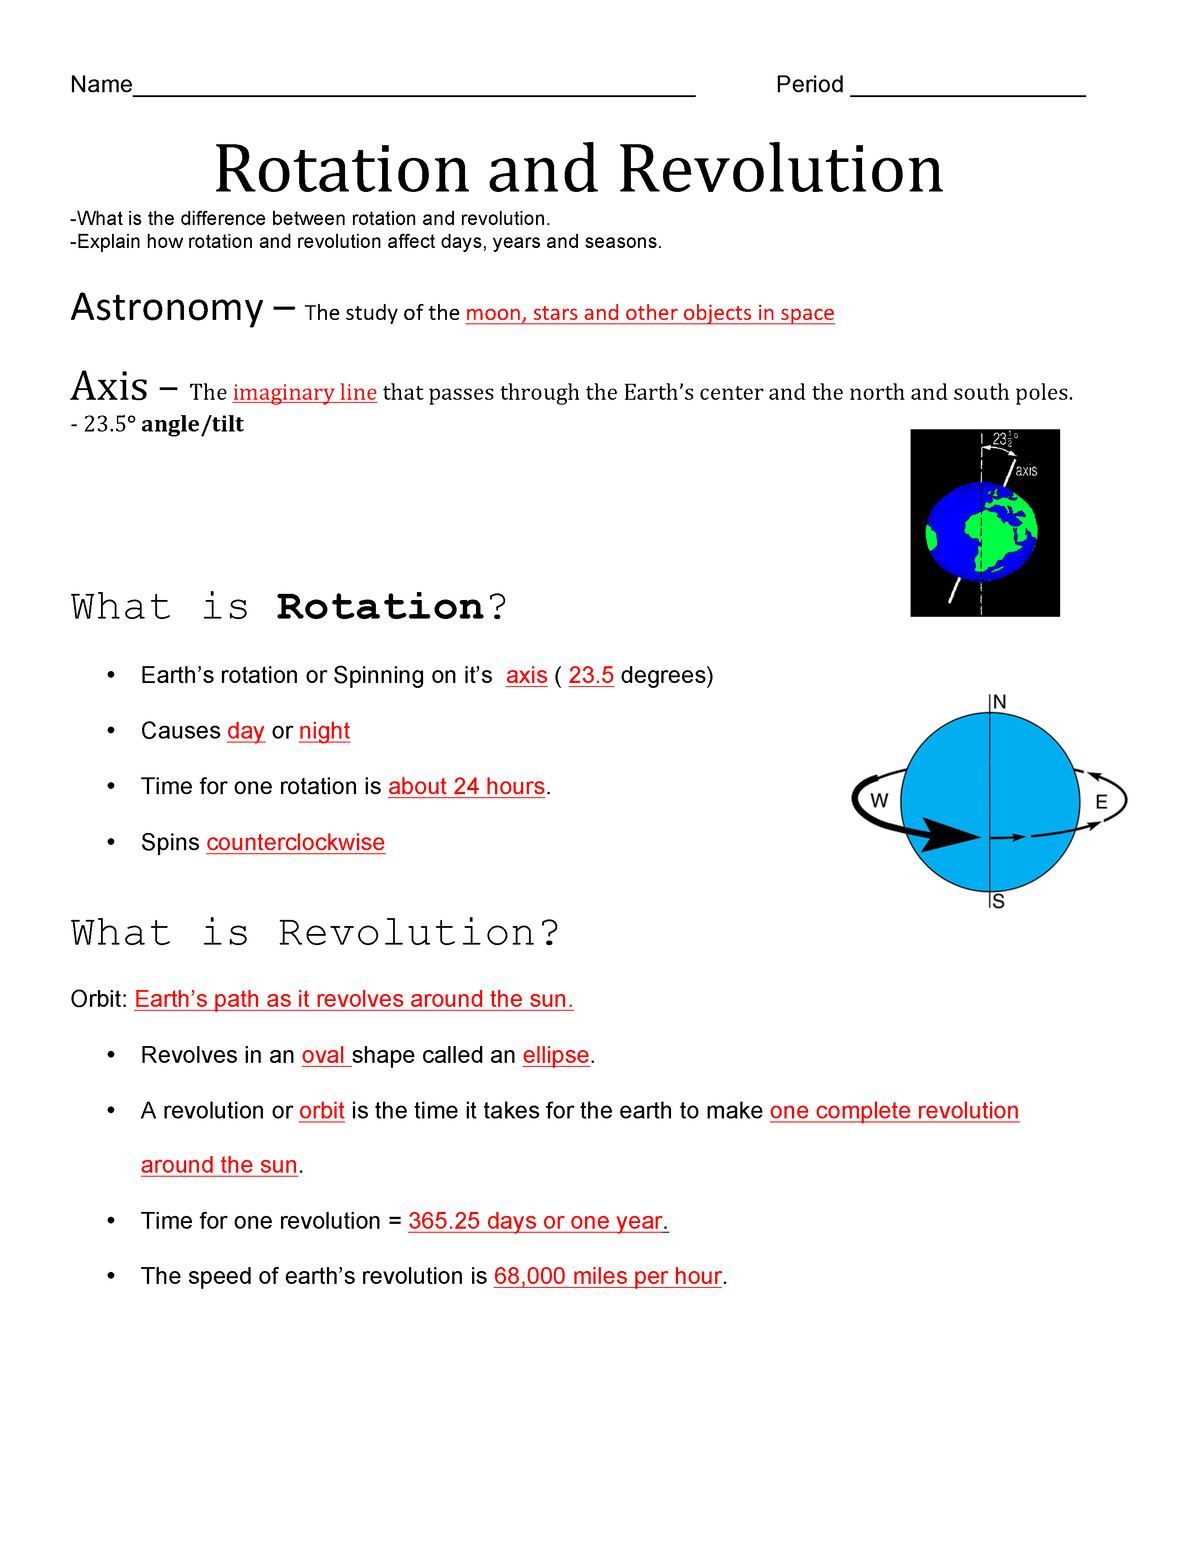 Difference between rotation and revolution 